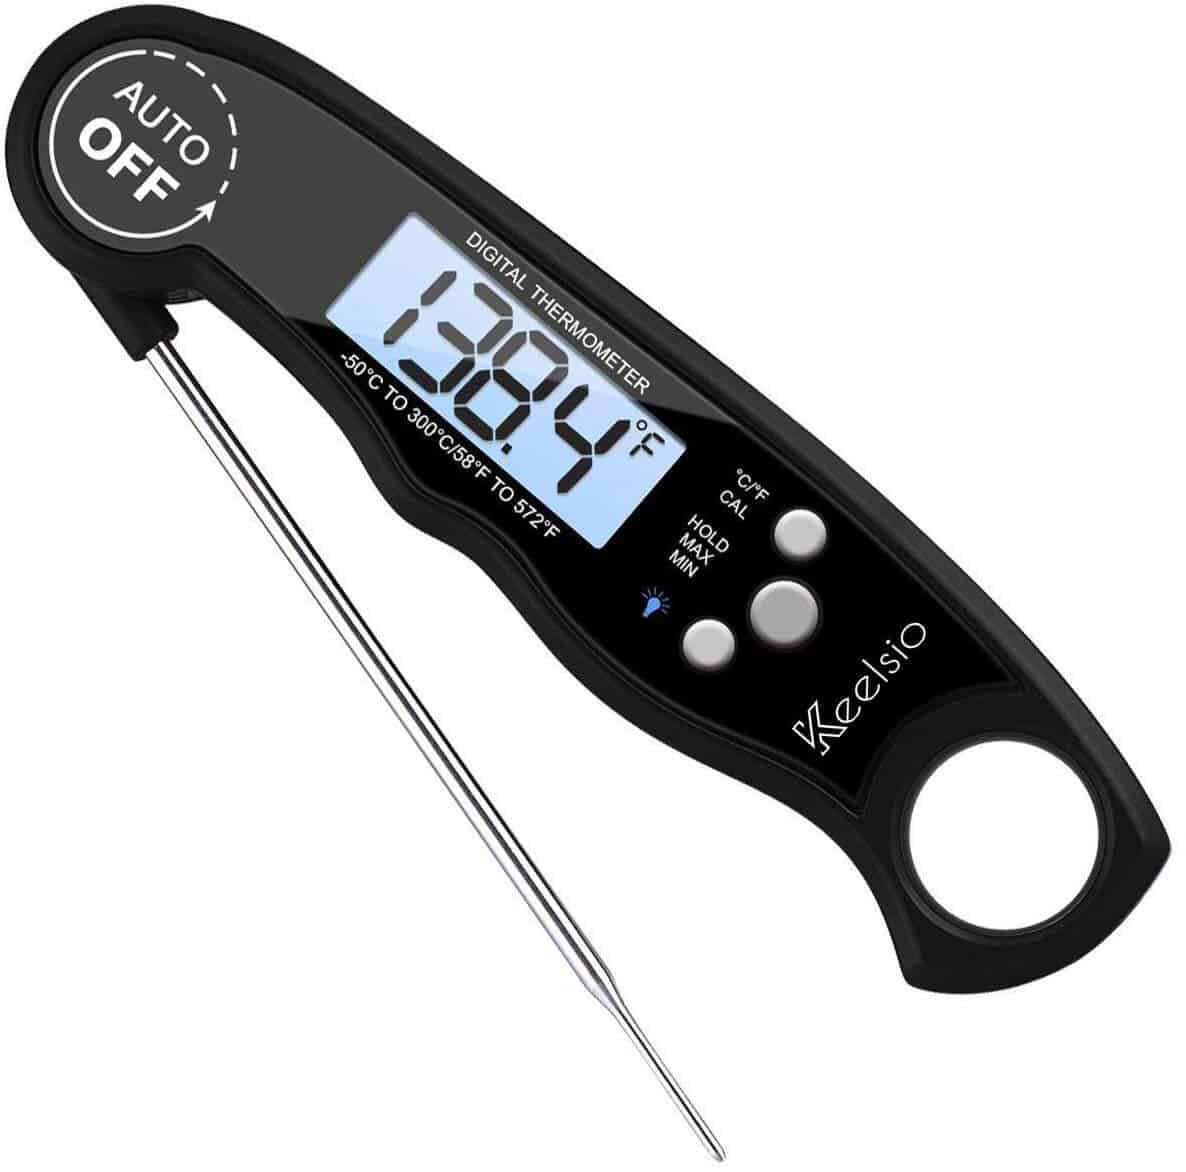 Best Digital Meat Thermometer (Reviews & Ratings For 2022)